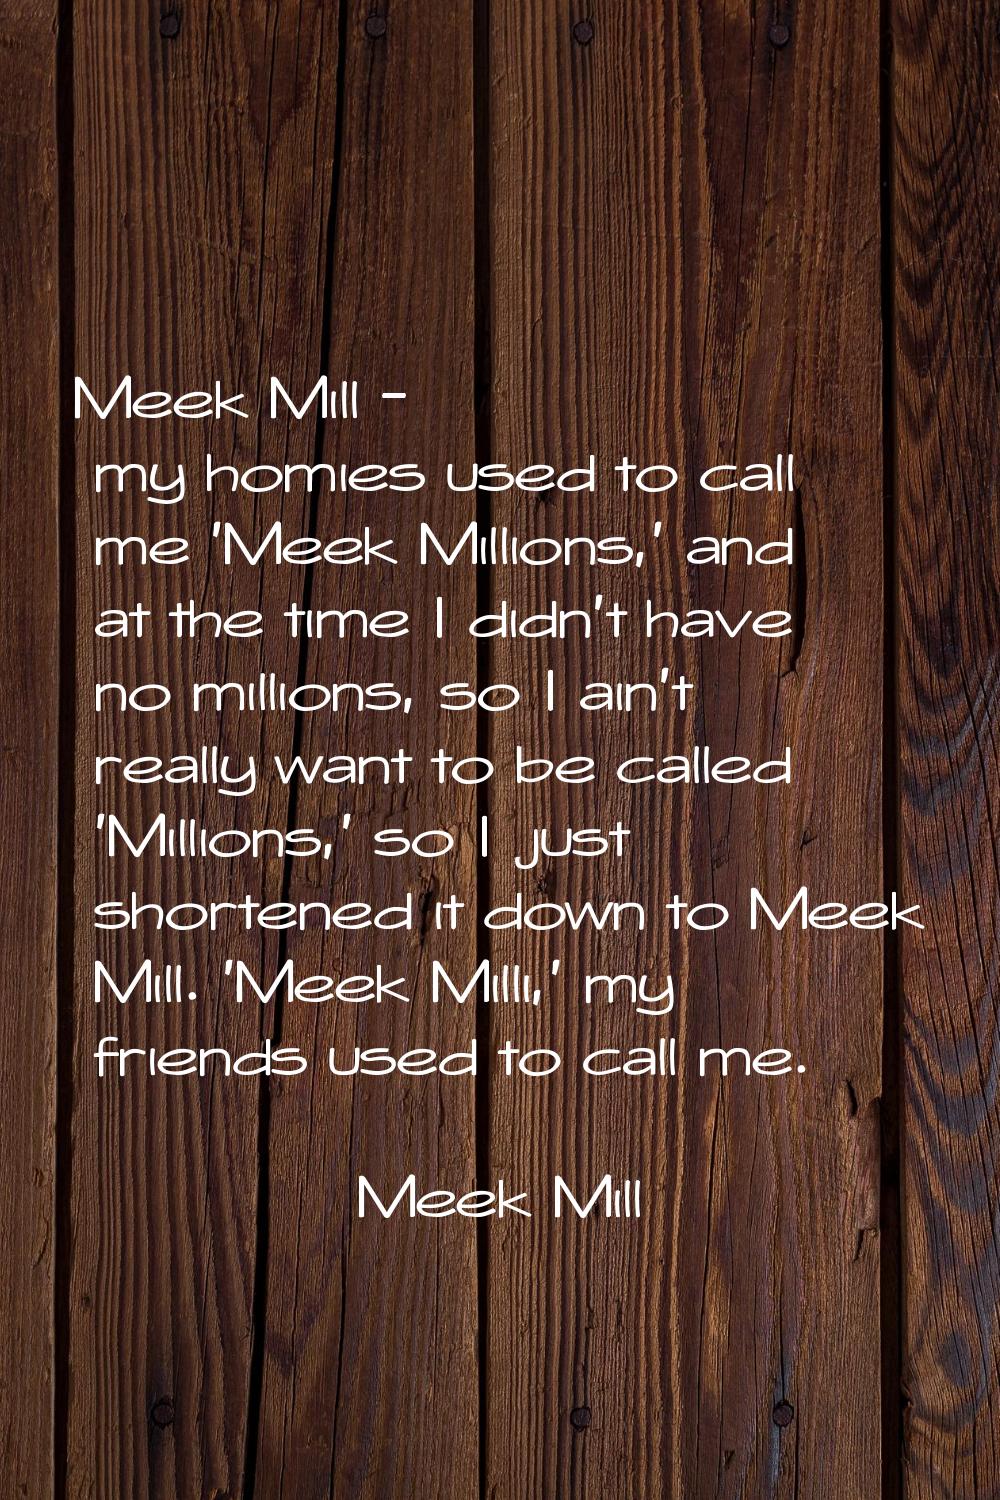 Meek Mill - my homies used to call me 'Meek Millions,' and at the time I didn't have no millions, s